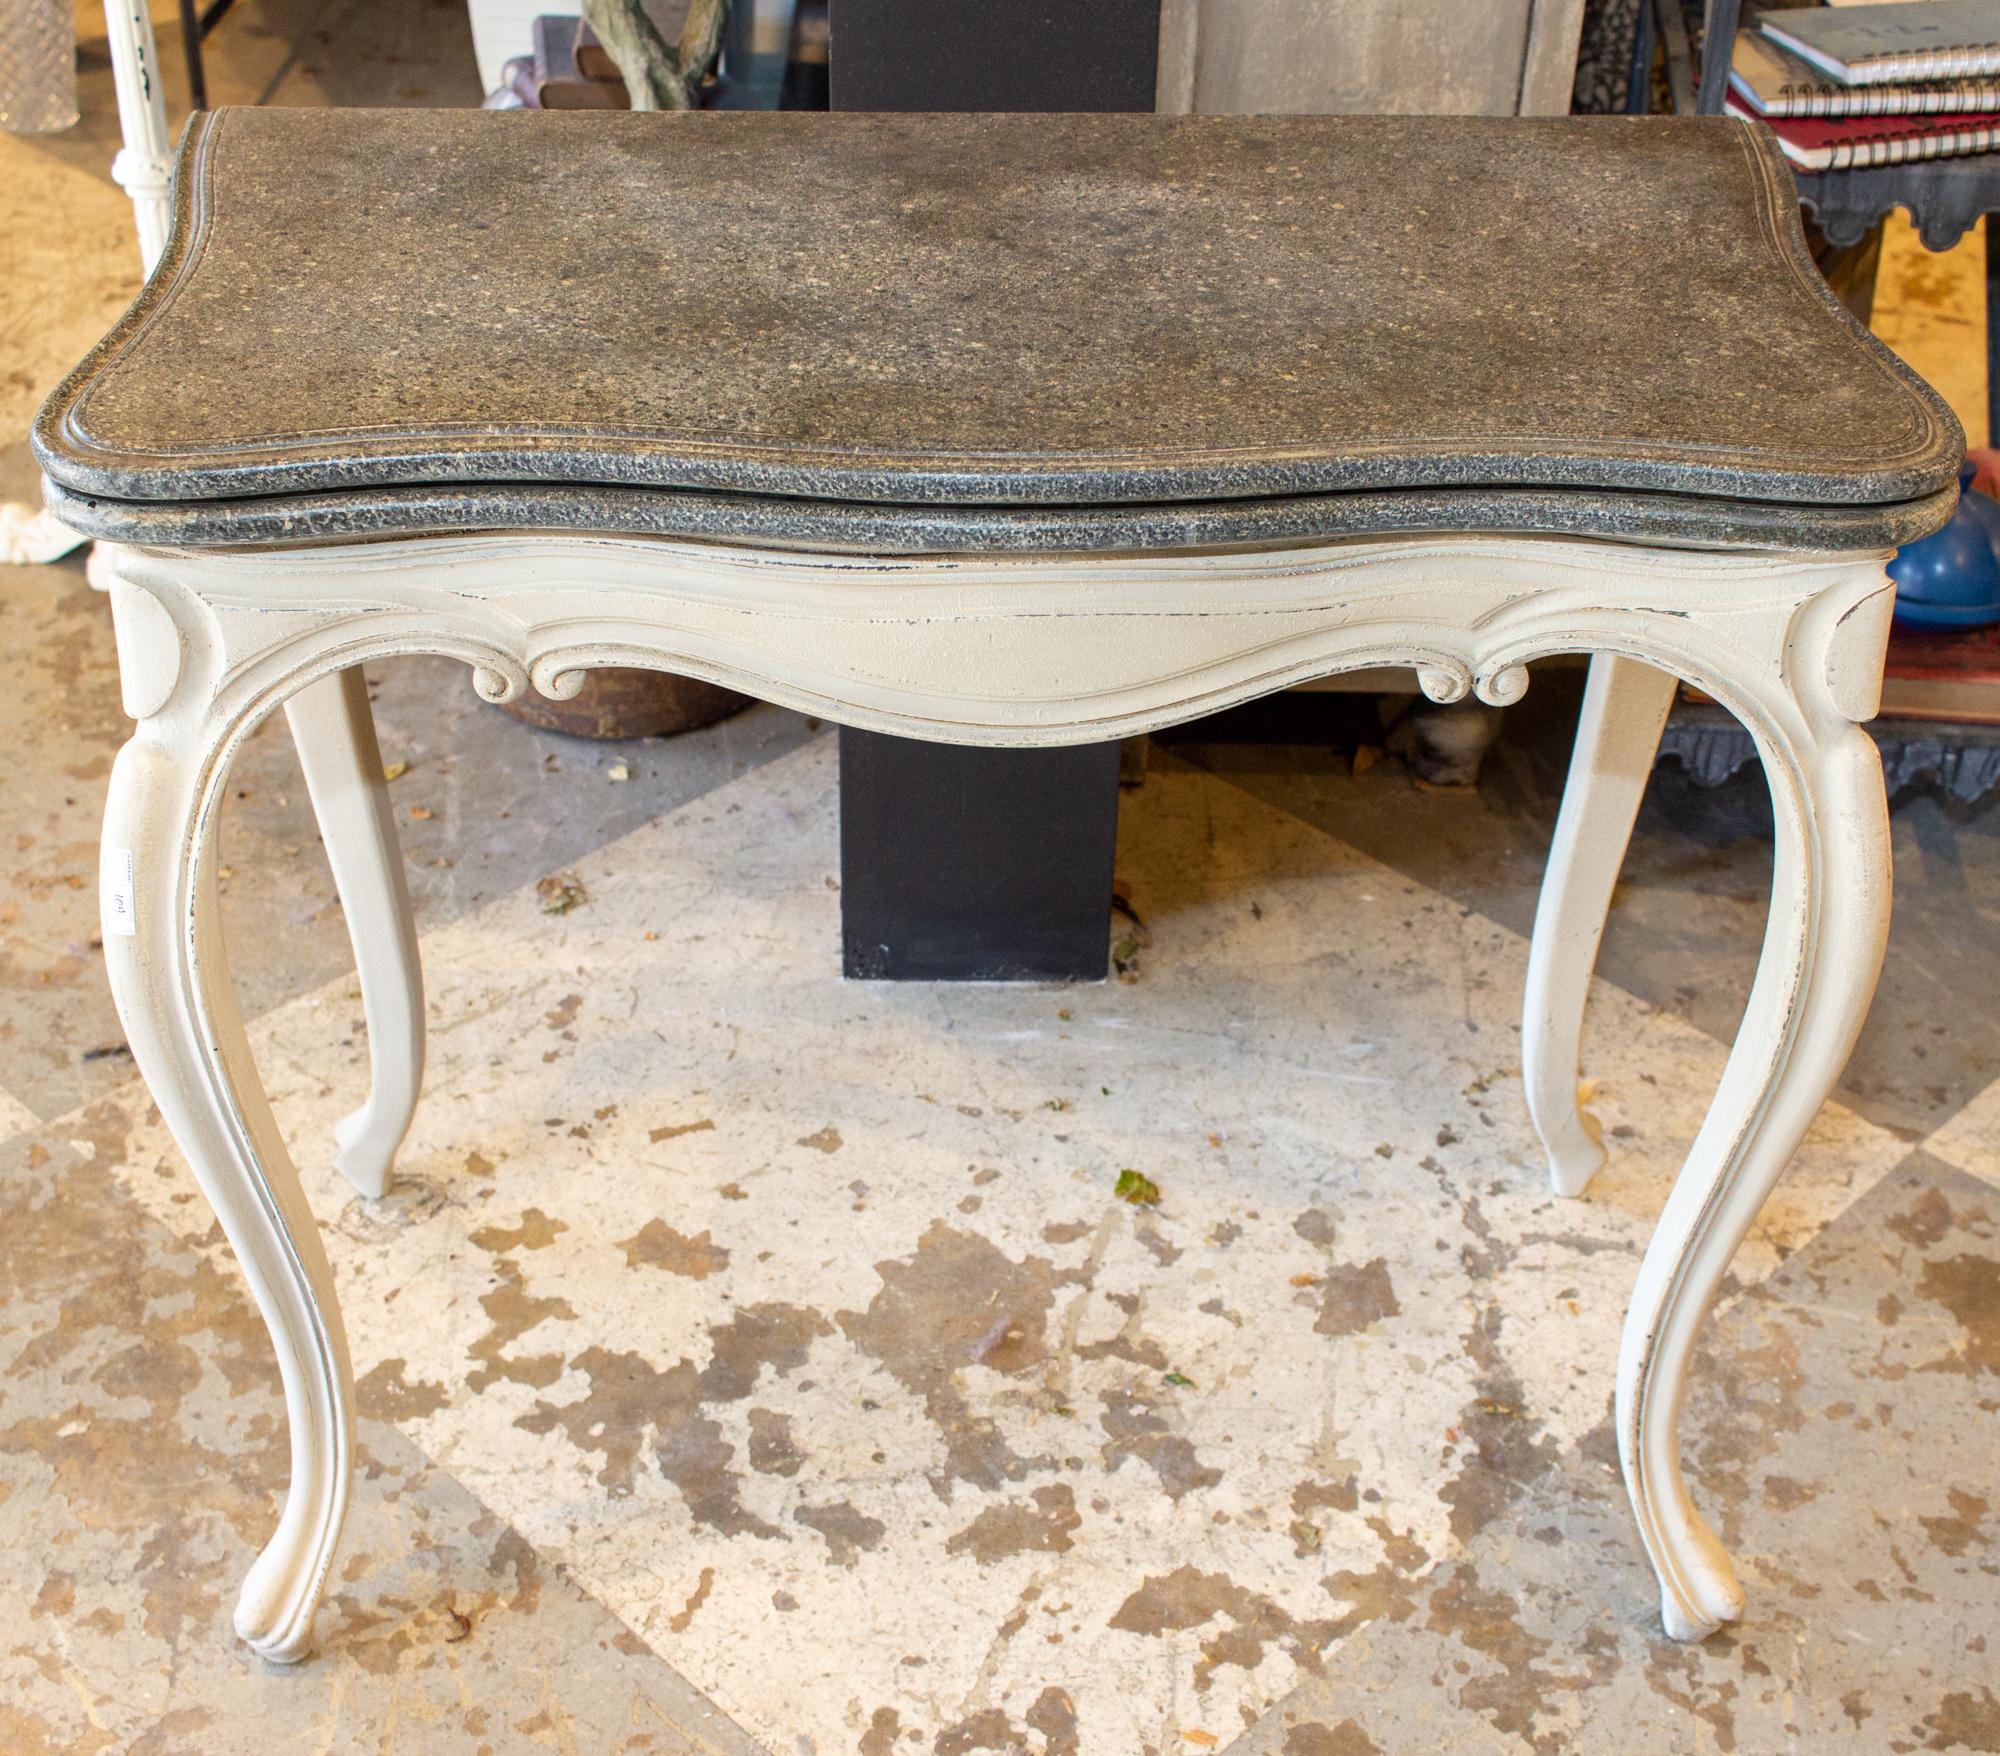 This antique French game table and console has a wonderful faux-painted finish. The top is finished in a faux stone with tones of gray, charcoal, greige and black. The table unfolds to reveal a black embossed leather top inside, perfect for the card